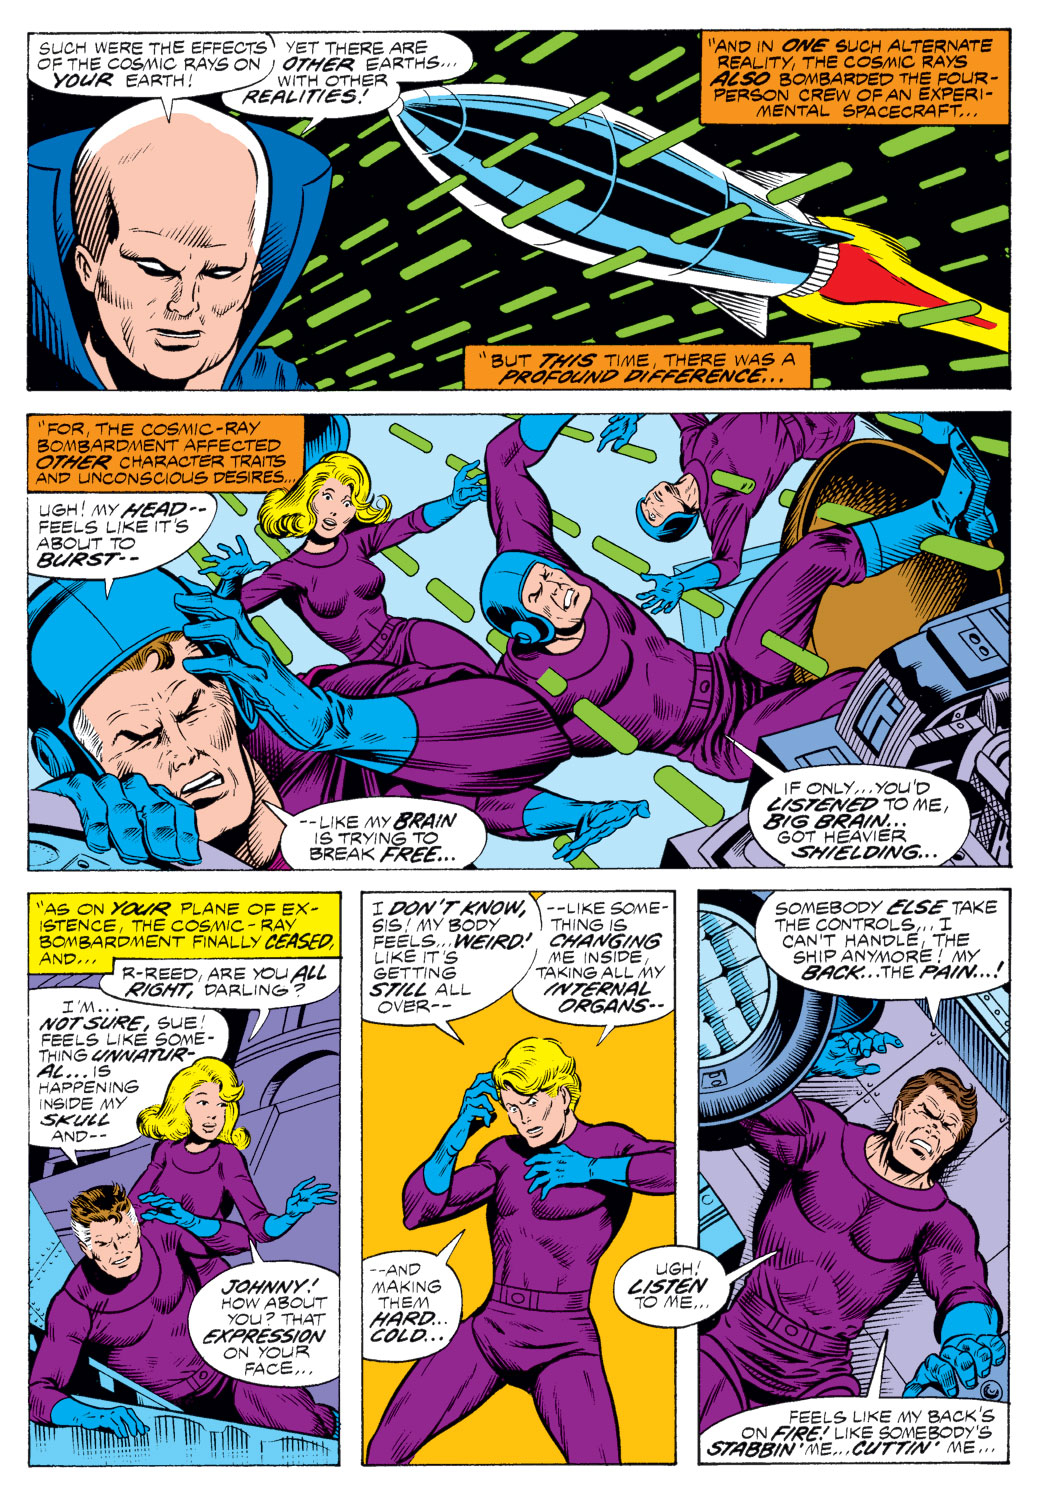 What If? (1977) issue 6 - The Fantastic Four had different superpowers - Page 10